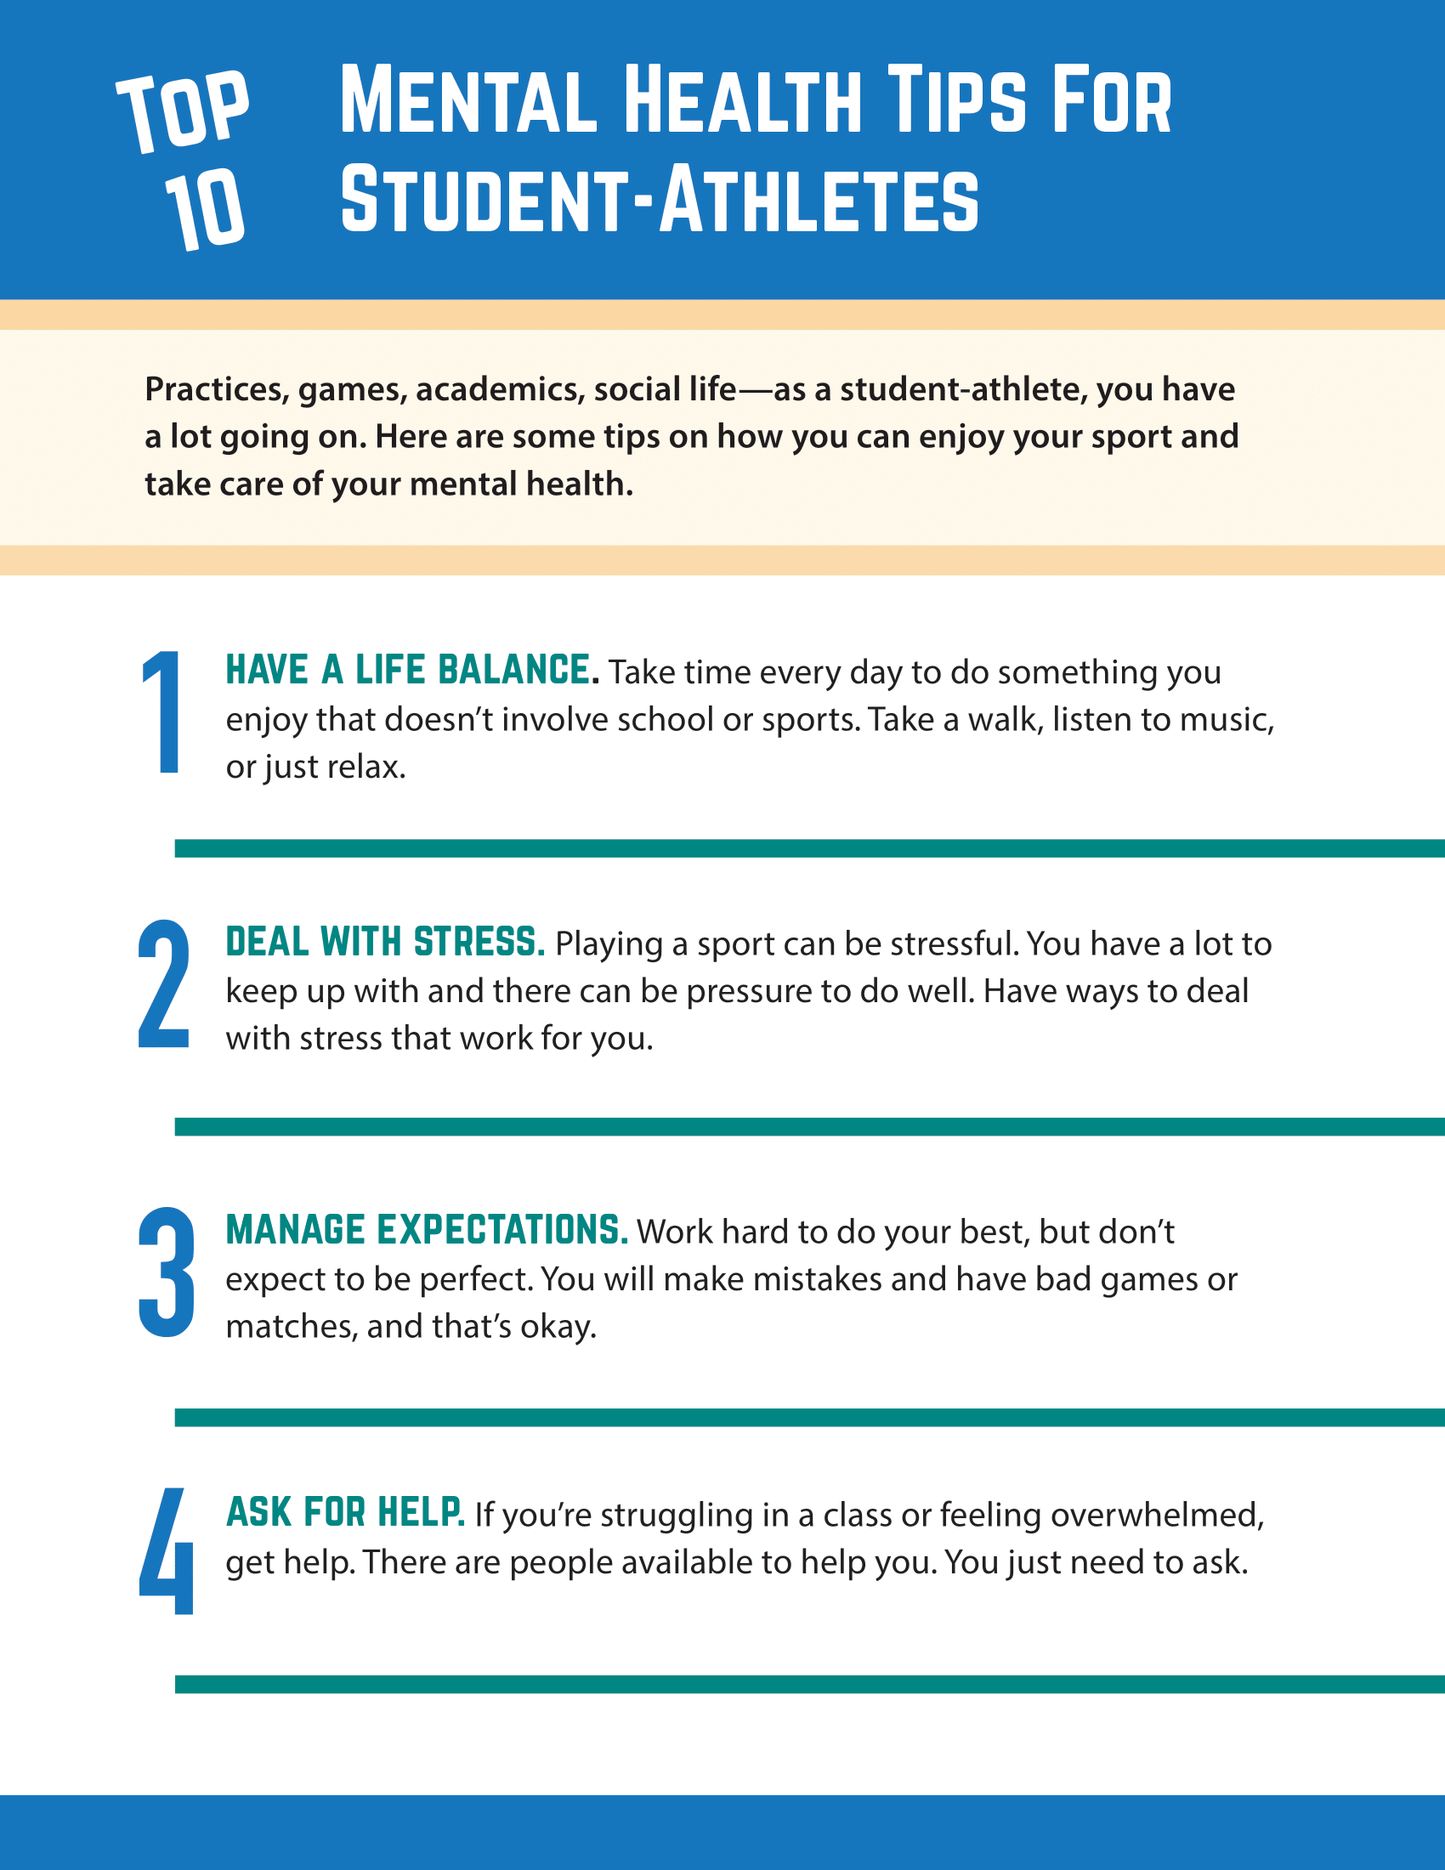 Top 10 Mental Health Tips for Student-Athletes